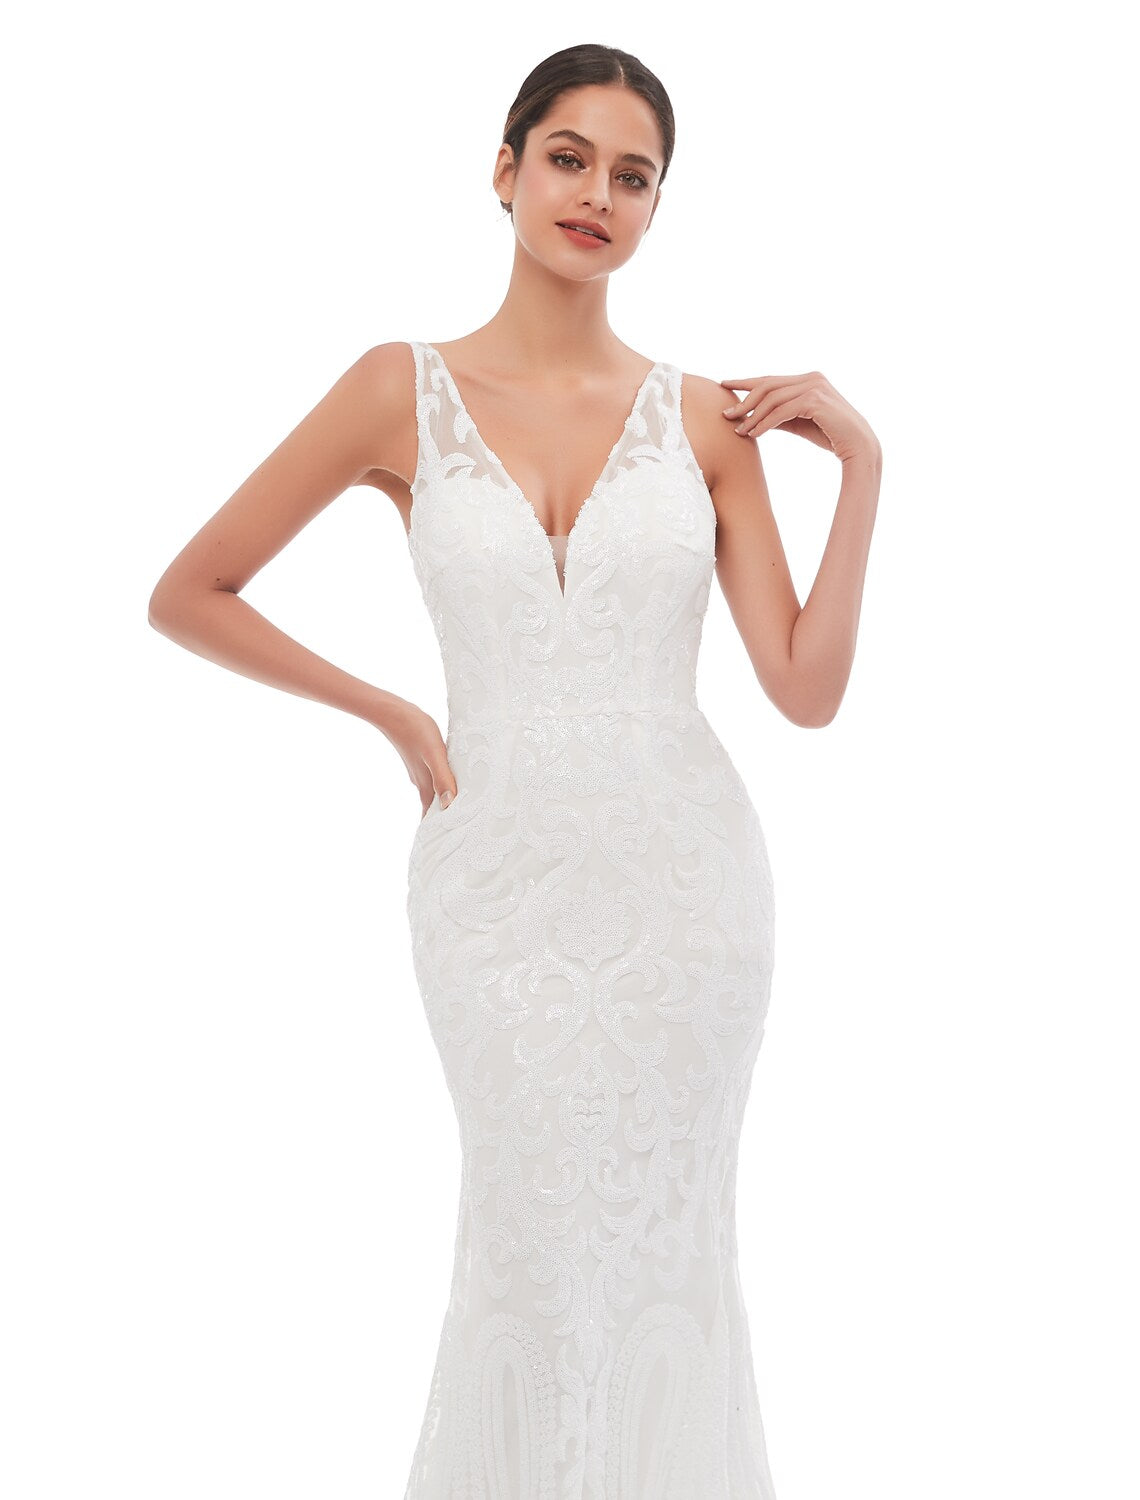 Evening Gown Celebrity Style Dress Engagement Sleeveless V Neck Sequined with Embroider